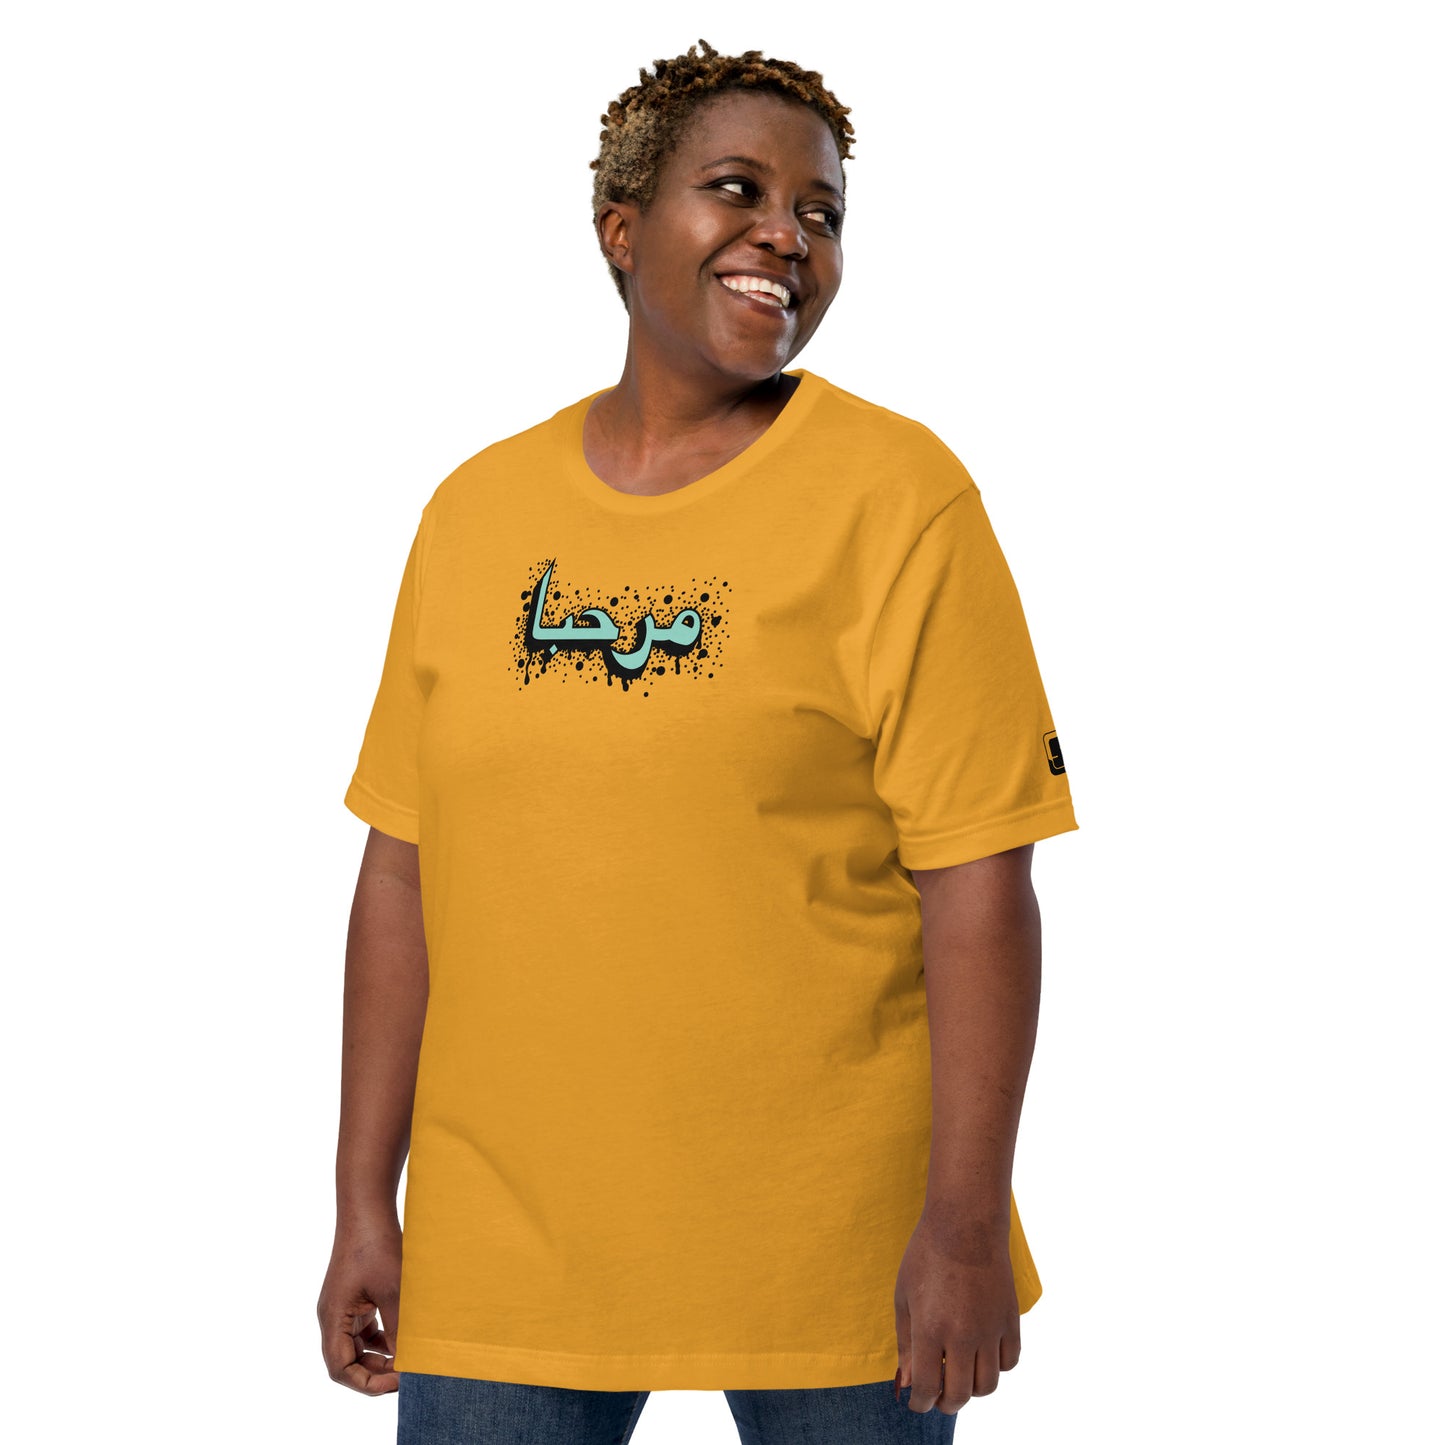 Woman with a joyful smile, sporting a short curly hairstyle, wearing a mustard yellow t-shirt with turquoise Arabic calligraphy and black accents, complete with a small logo patch on the sleeve, set against a white background.